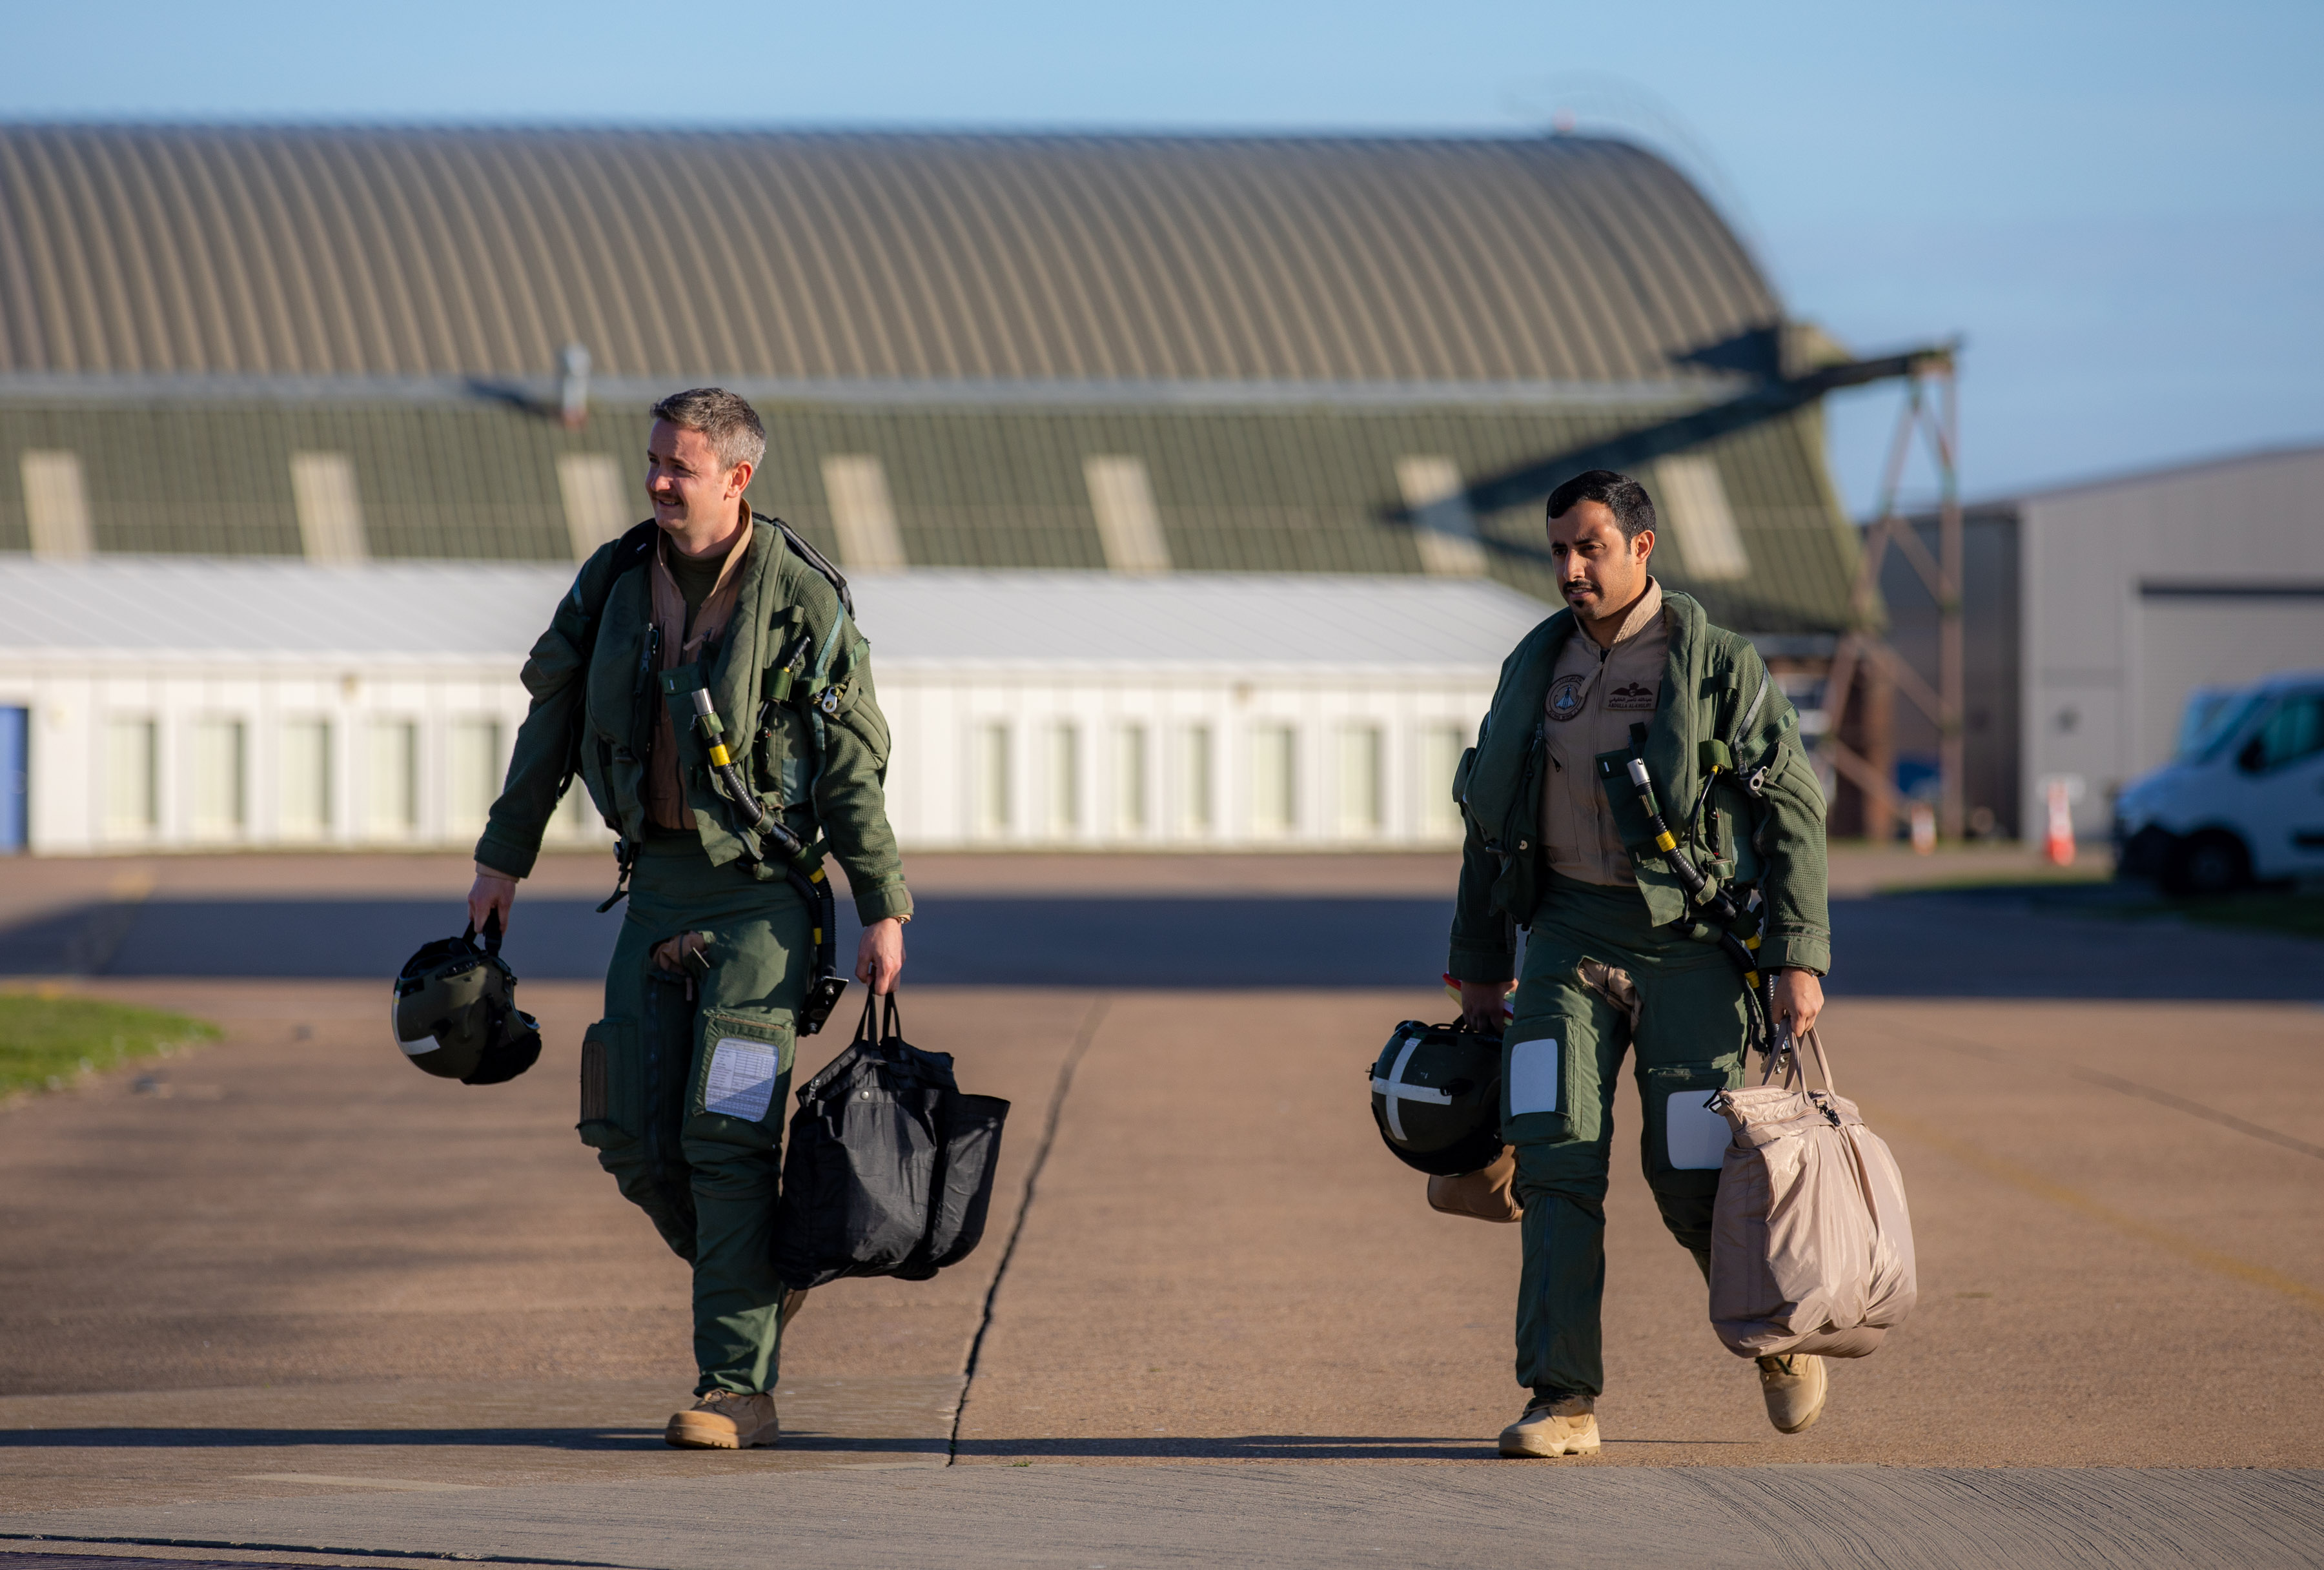 Image shows RAF Pilots walking across airfield with bags.